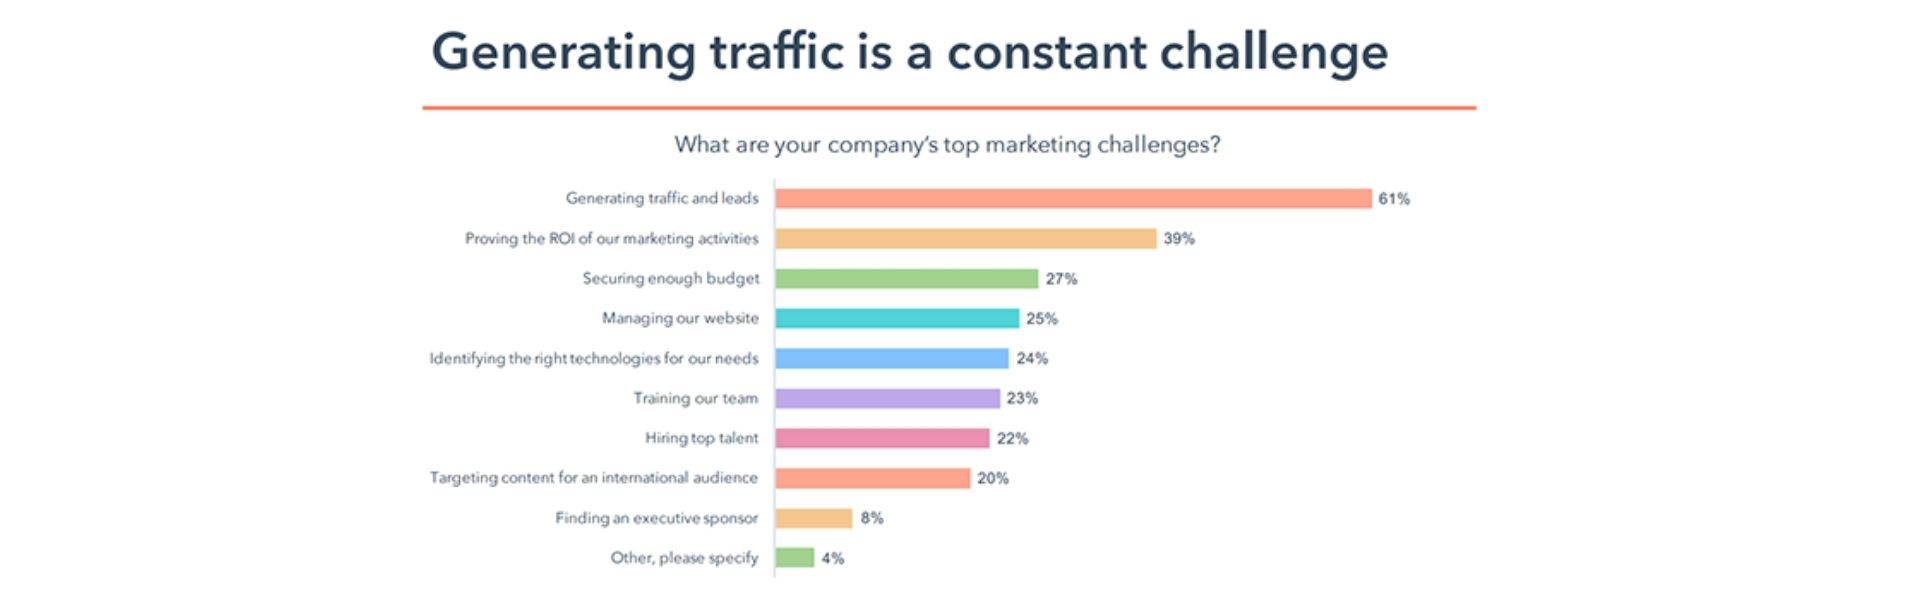 Lead generation is number one challenge in 2021 for marketers